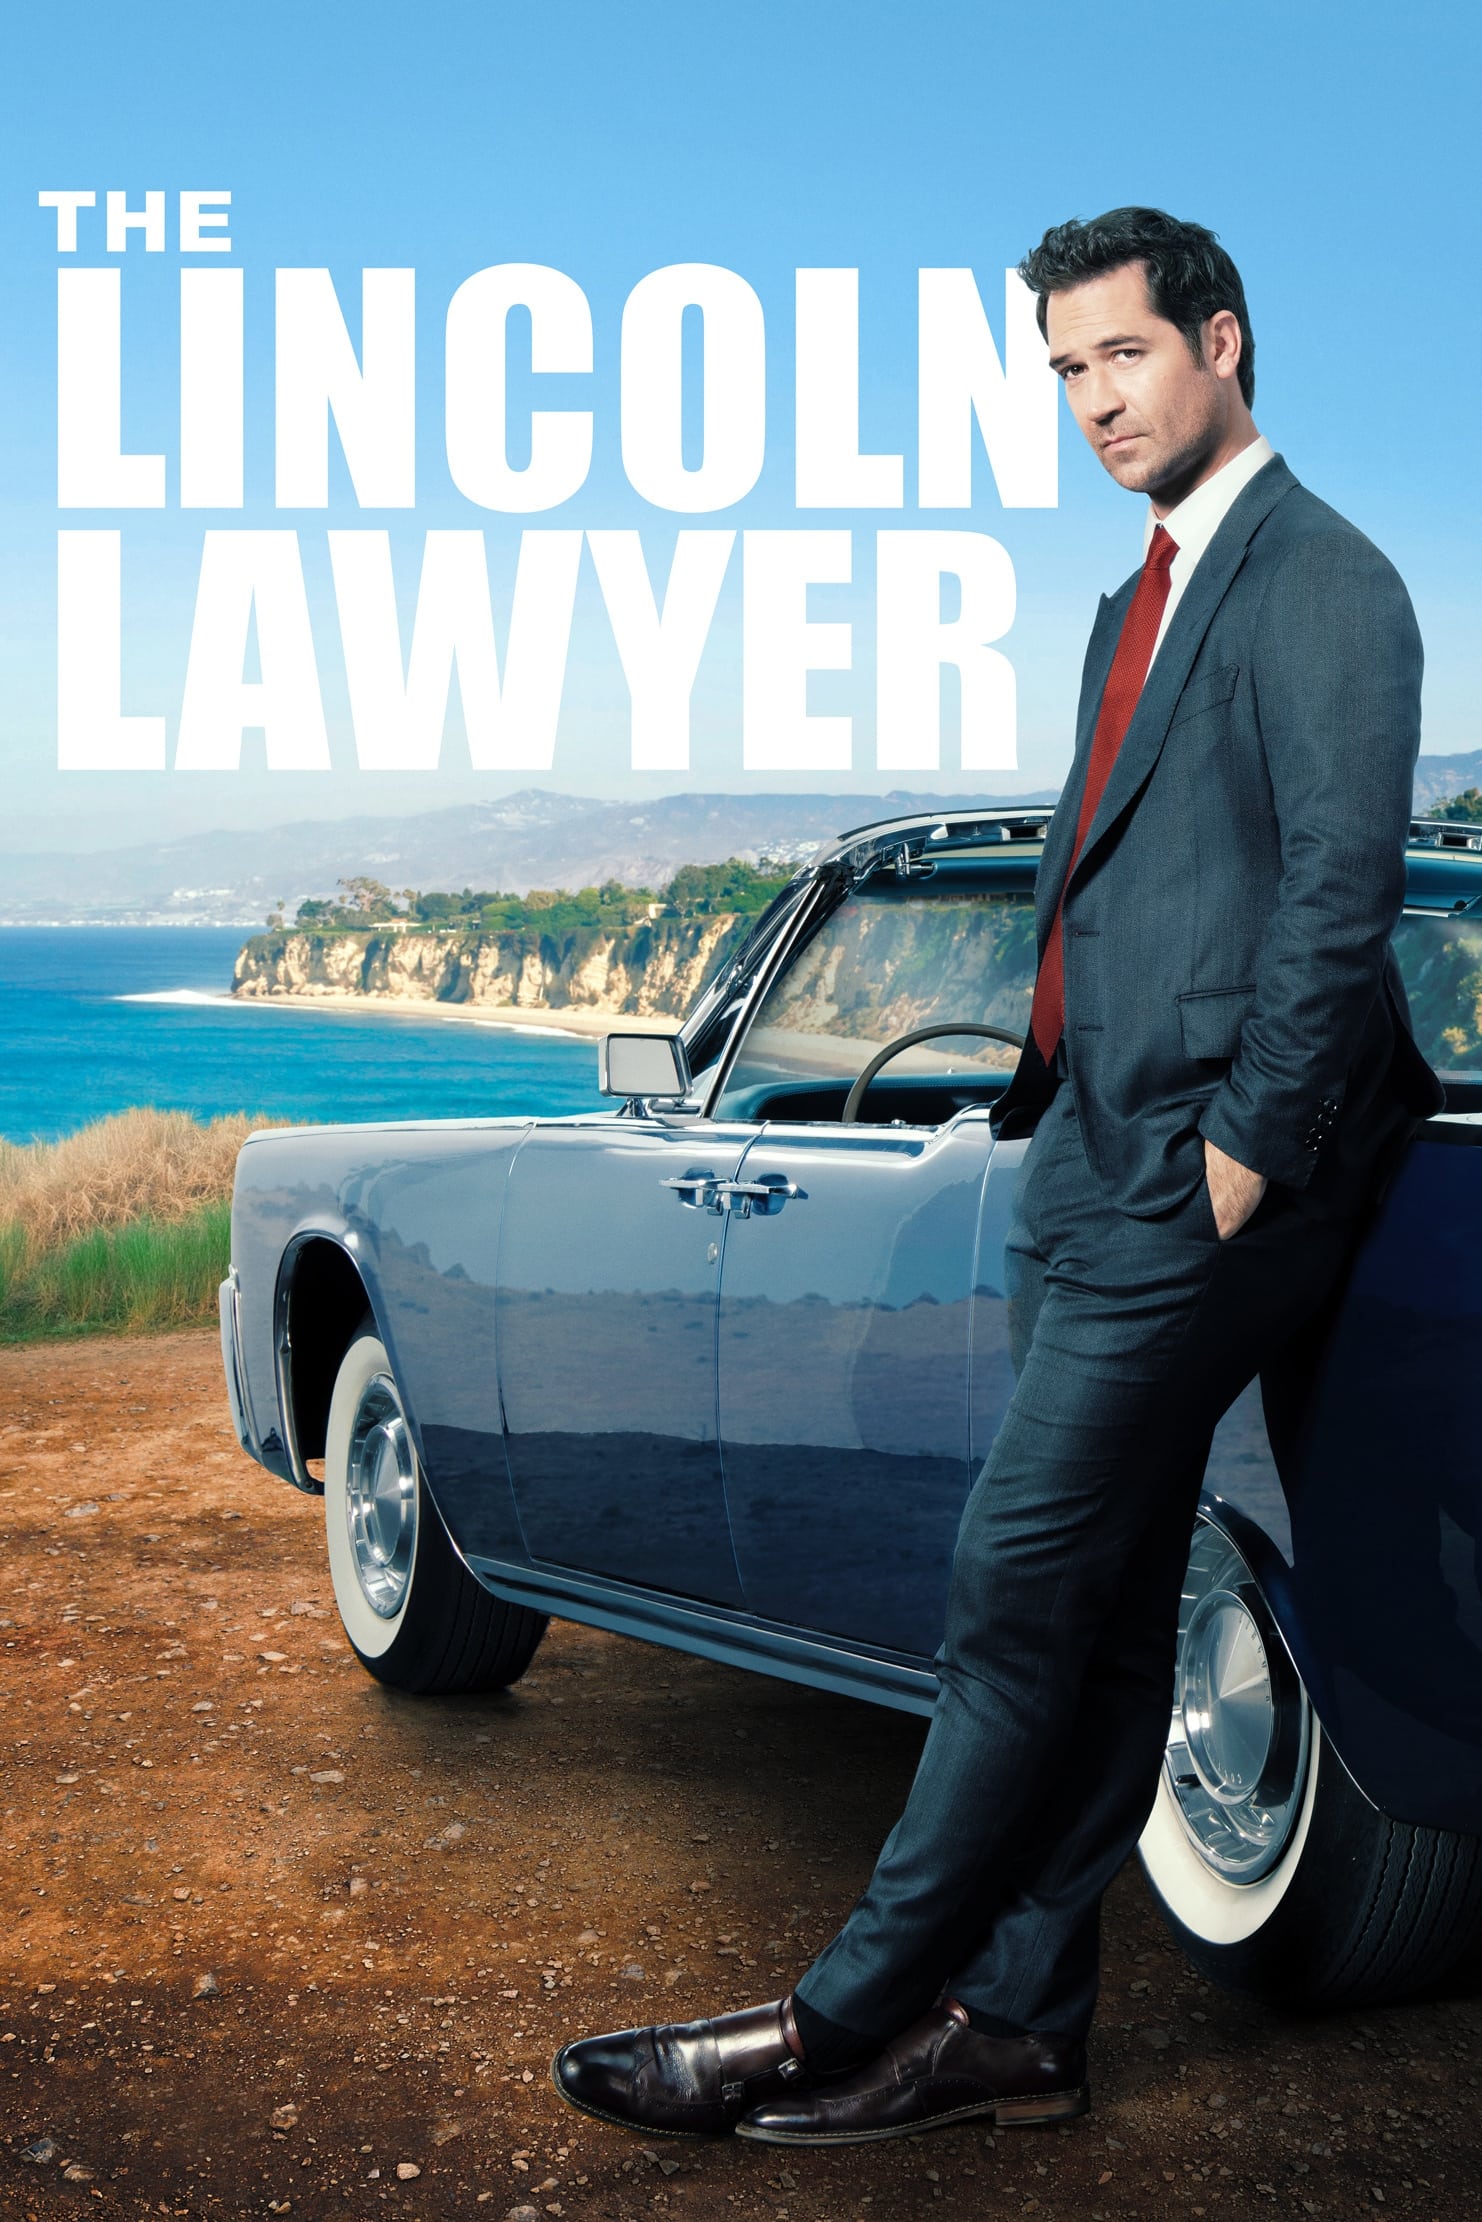 The Lincoln Lawyer TV Shows About Based On Novel Or Book